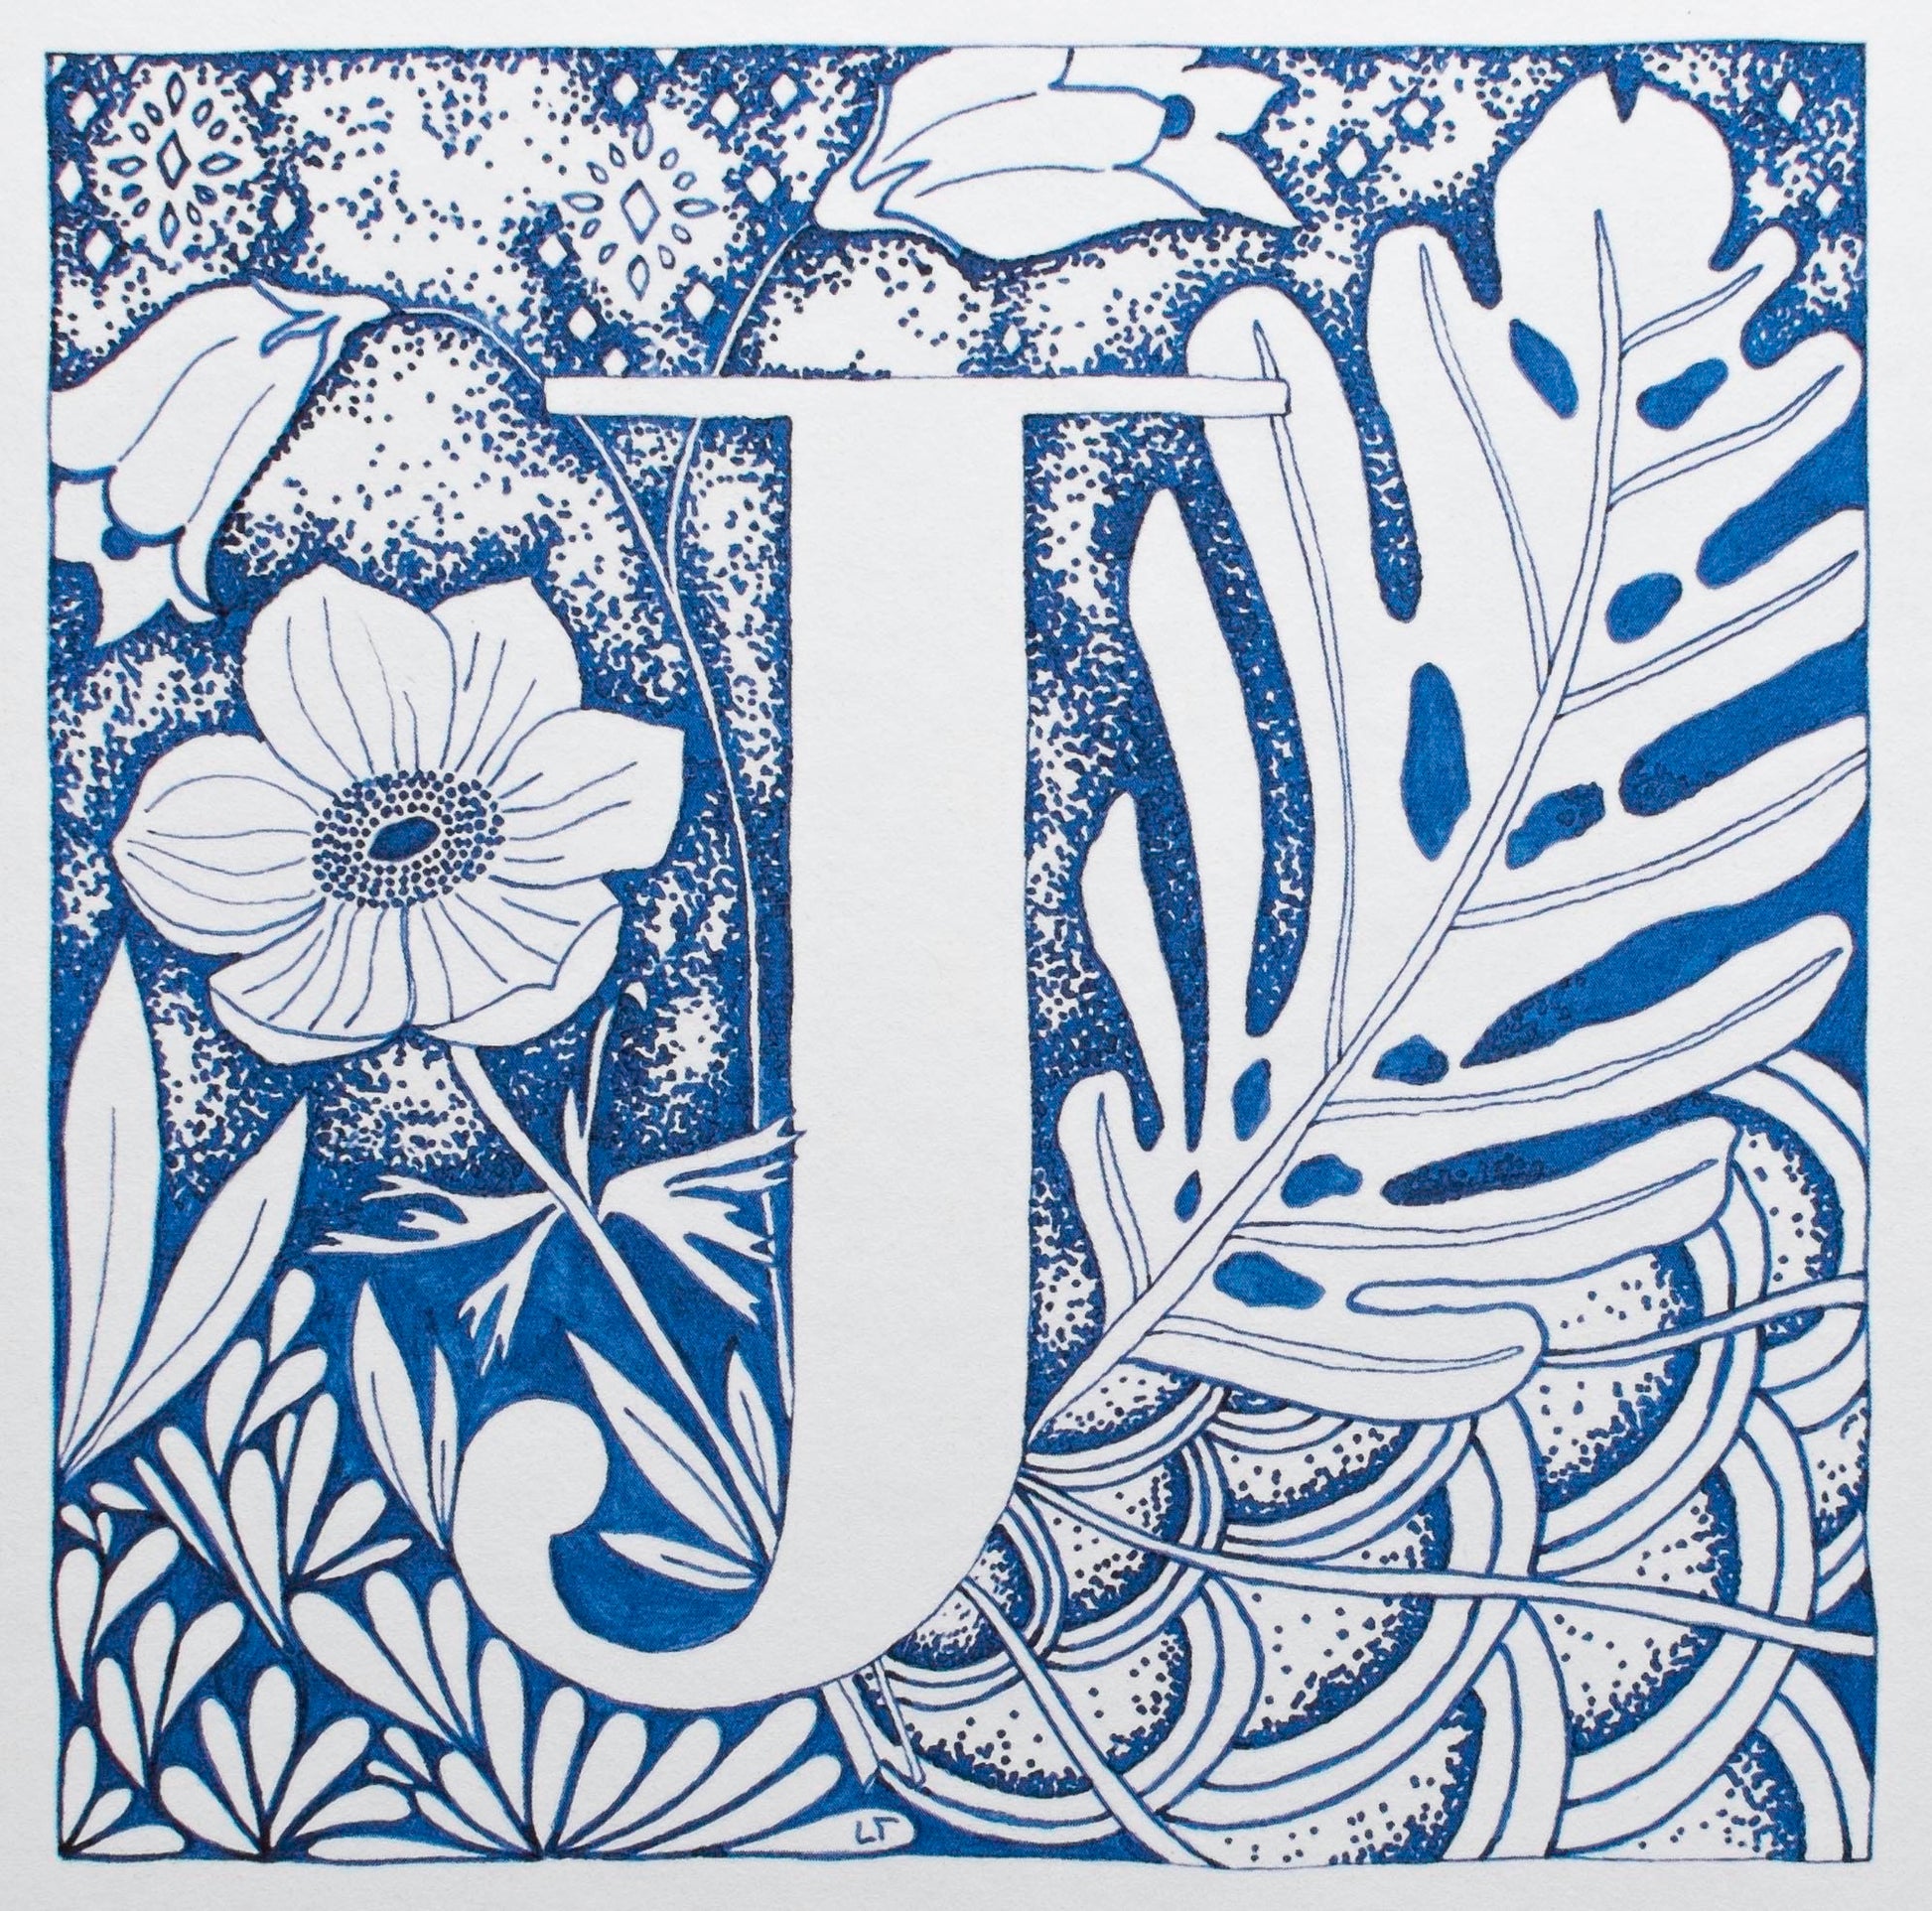 Limited Edition Print of Monogram J, letter print, blue ink, floral, insects details, enluminure, miniature, laurateodoriart